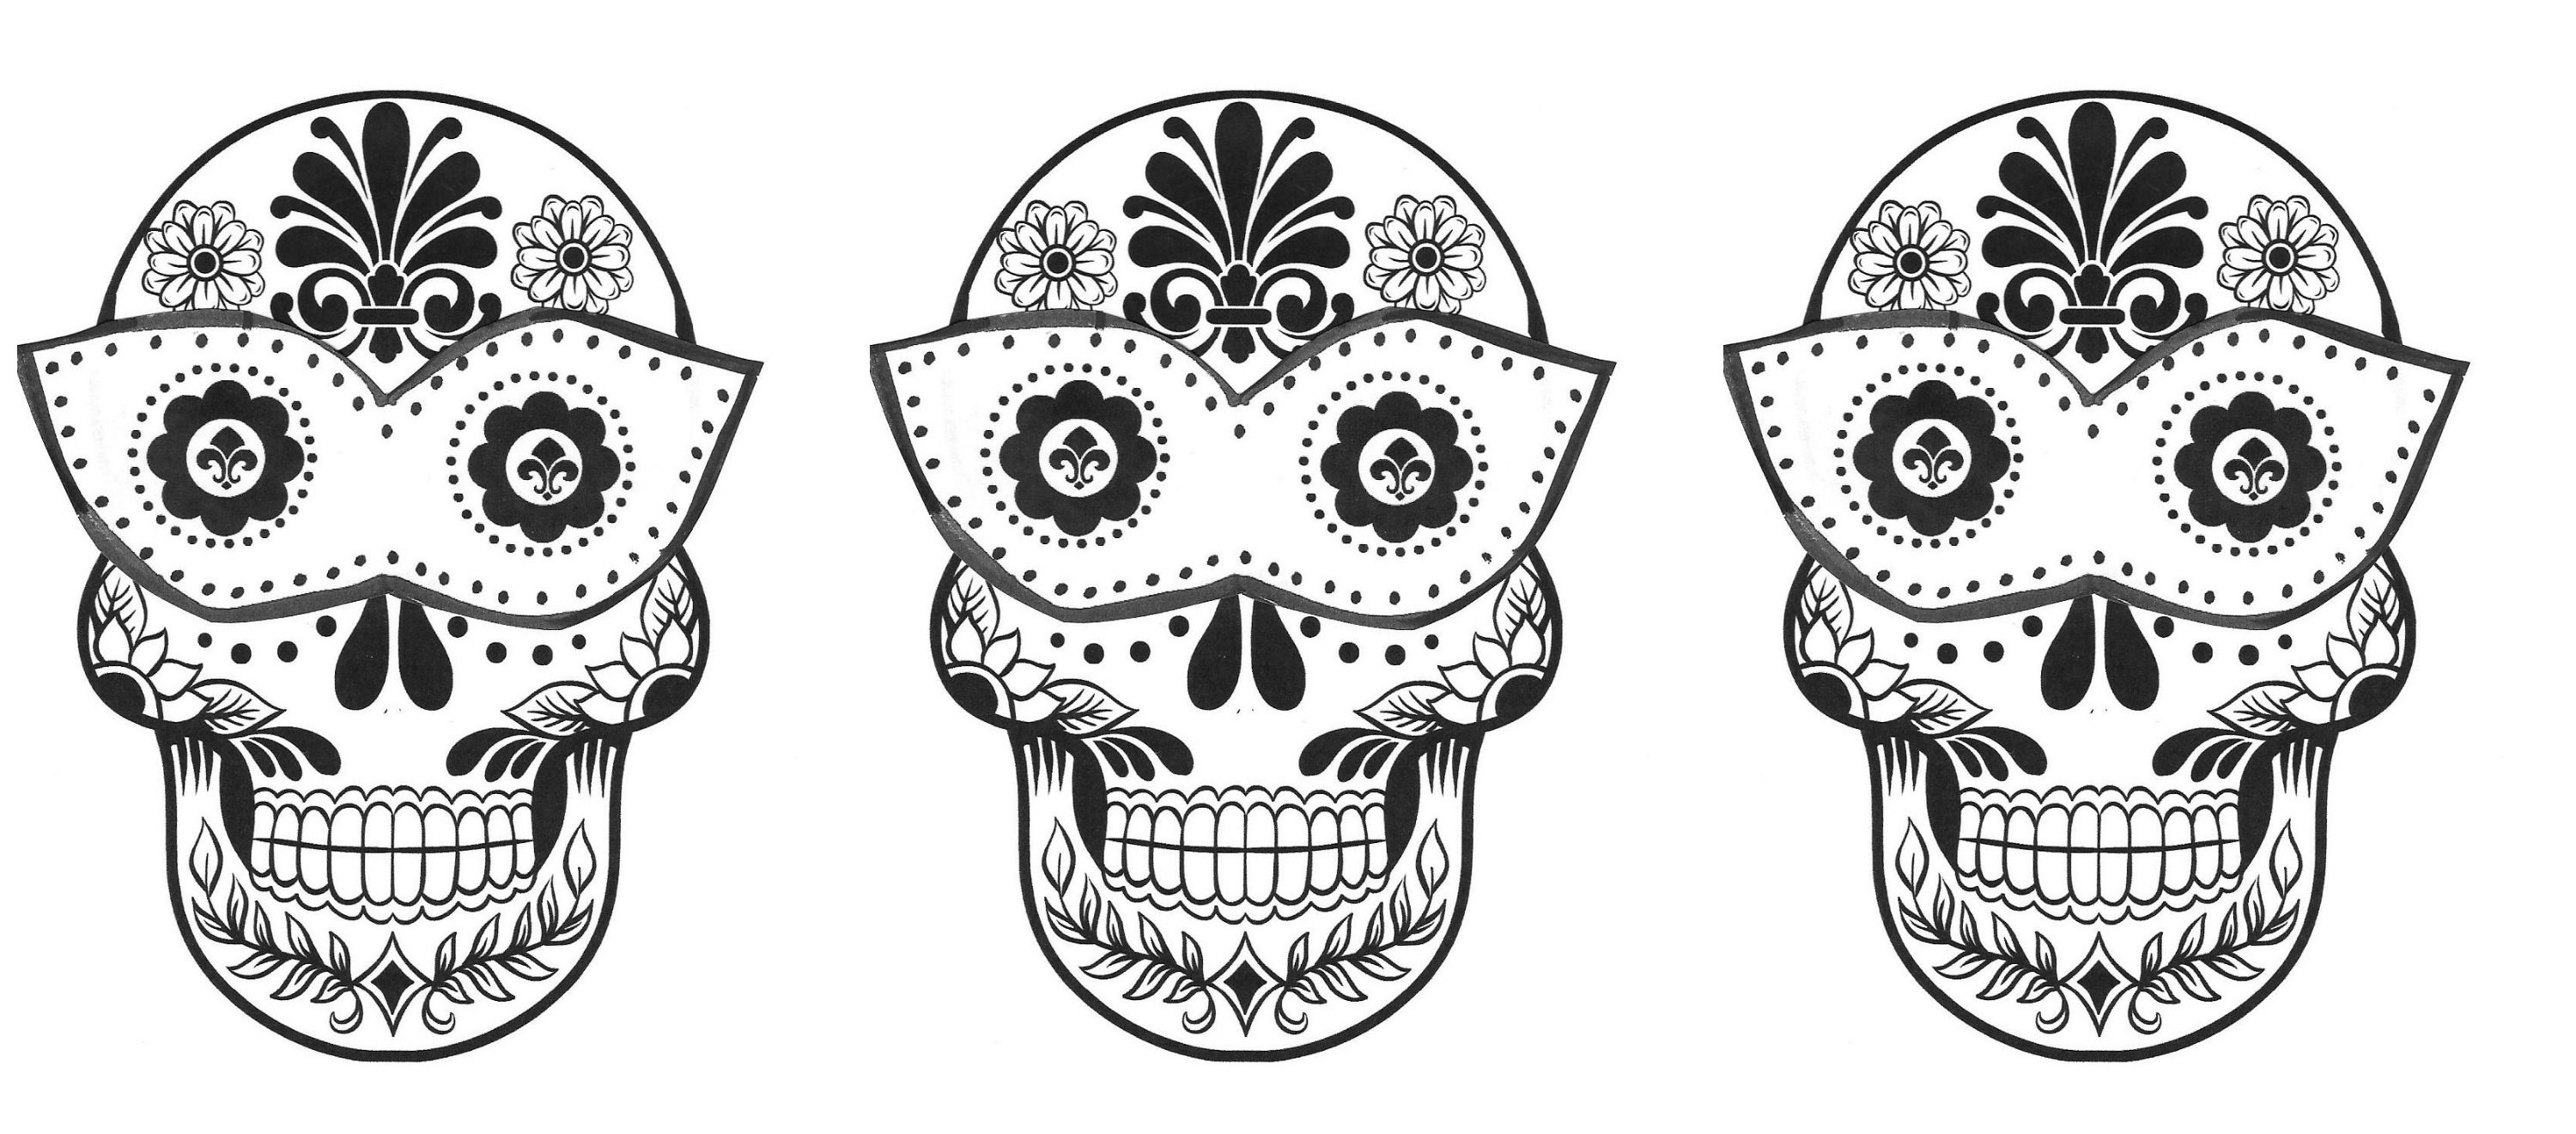 Chihuahua Sugar Skull Coloring Page - Coloring Pages For All Ages